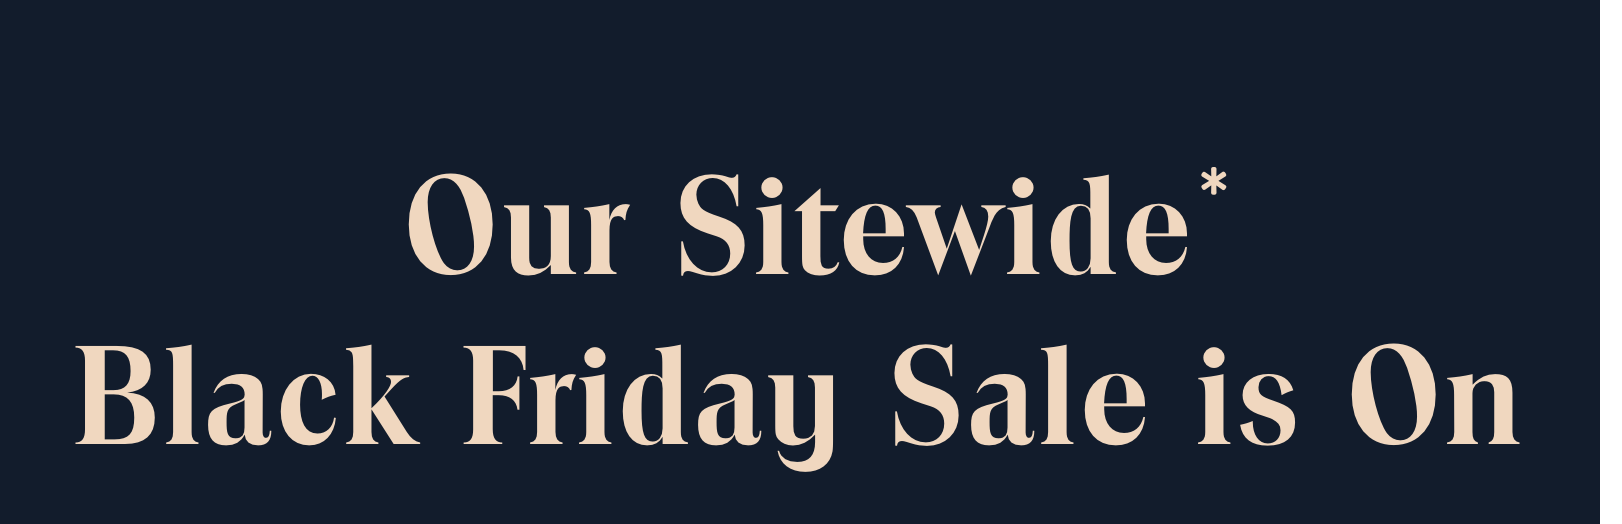 Our Sitewide* Black Friday Sale is On